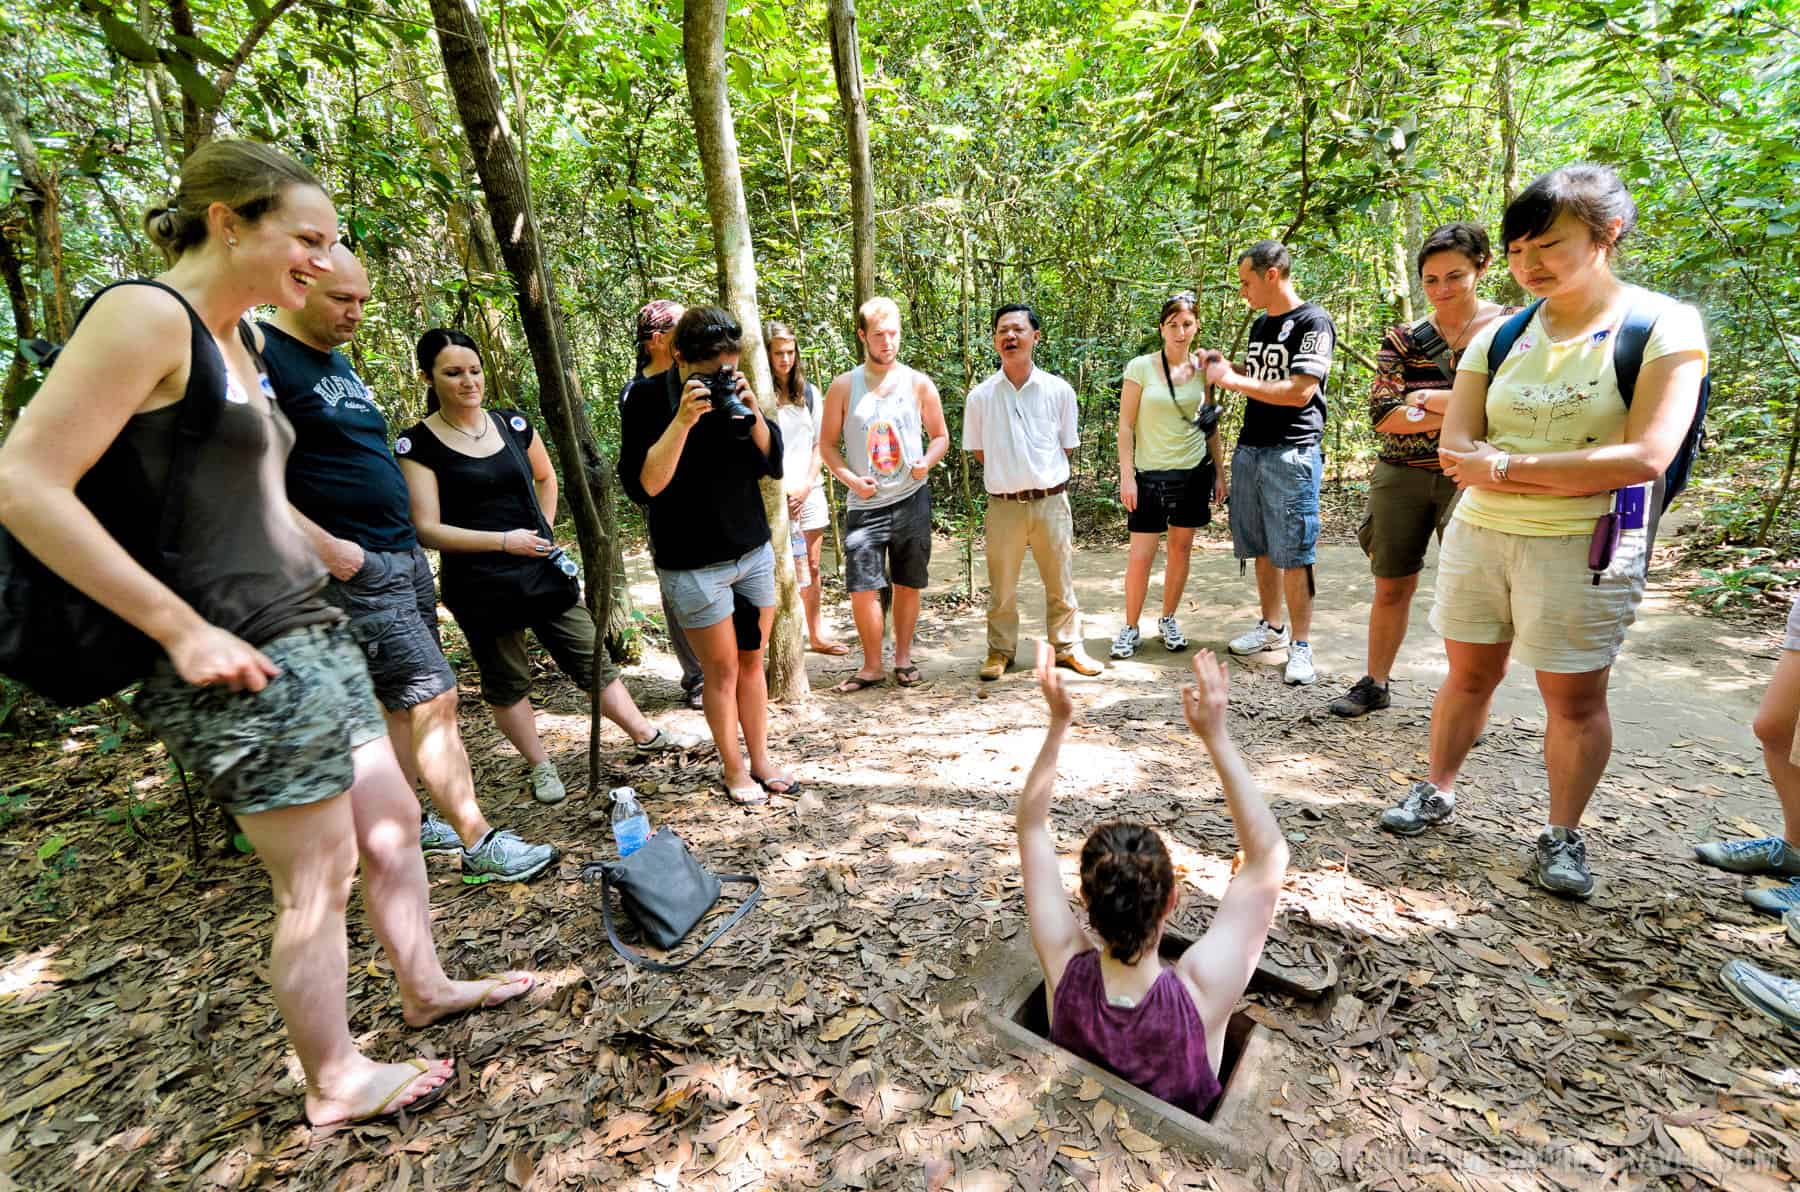 Day 3: Free time in the morning - Cu Chi Tunnels - Da Nang - Hoi An